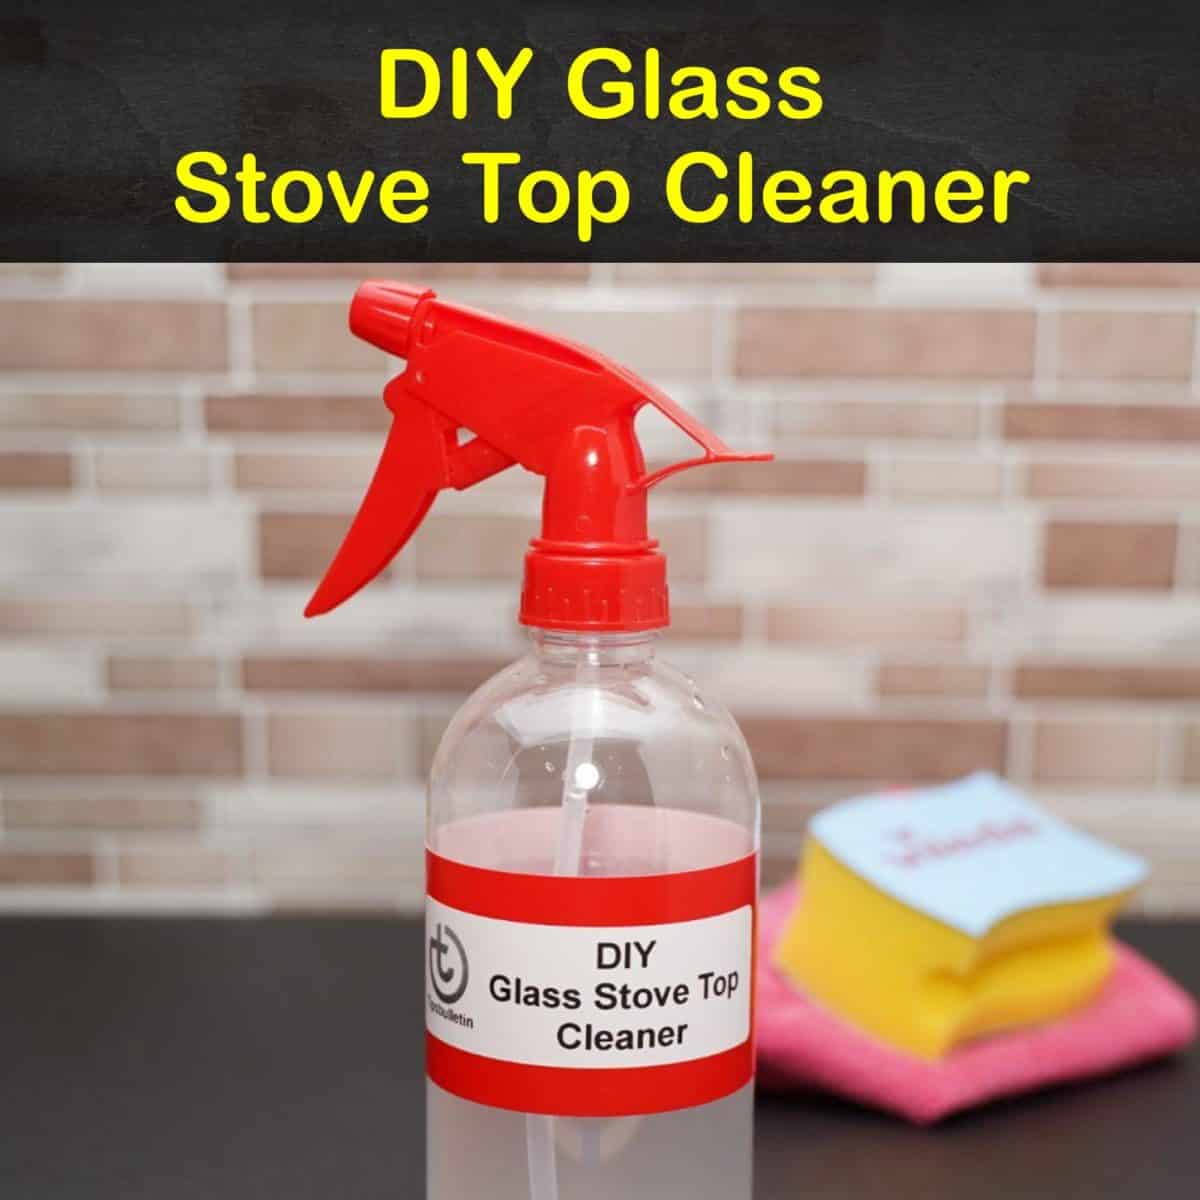 Diy Glass Stove Top Cleaner S99 1200x1200 